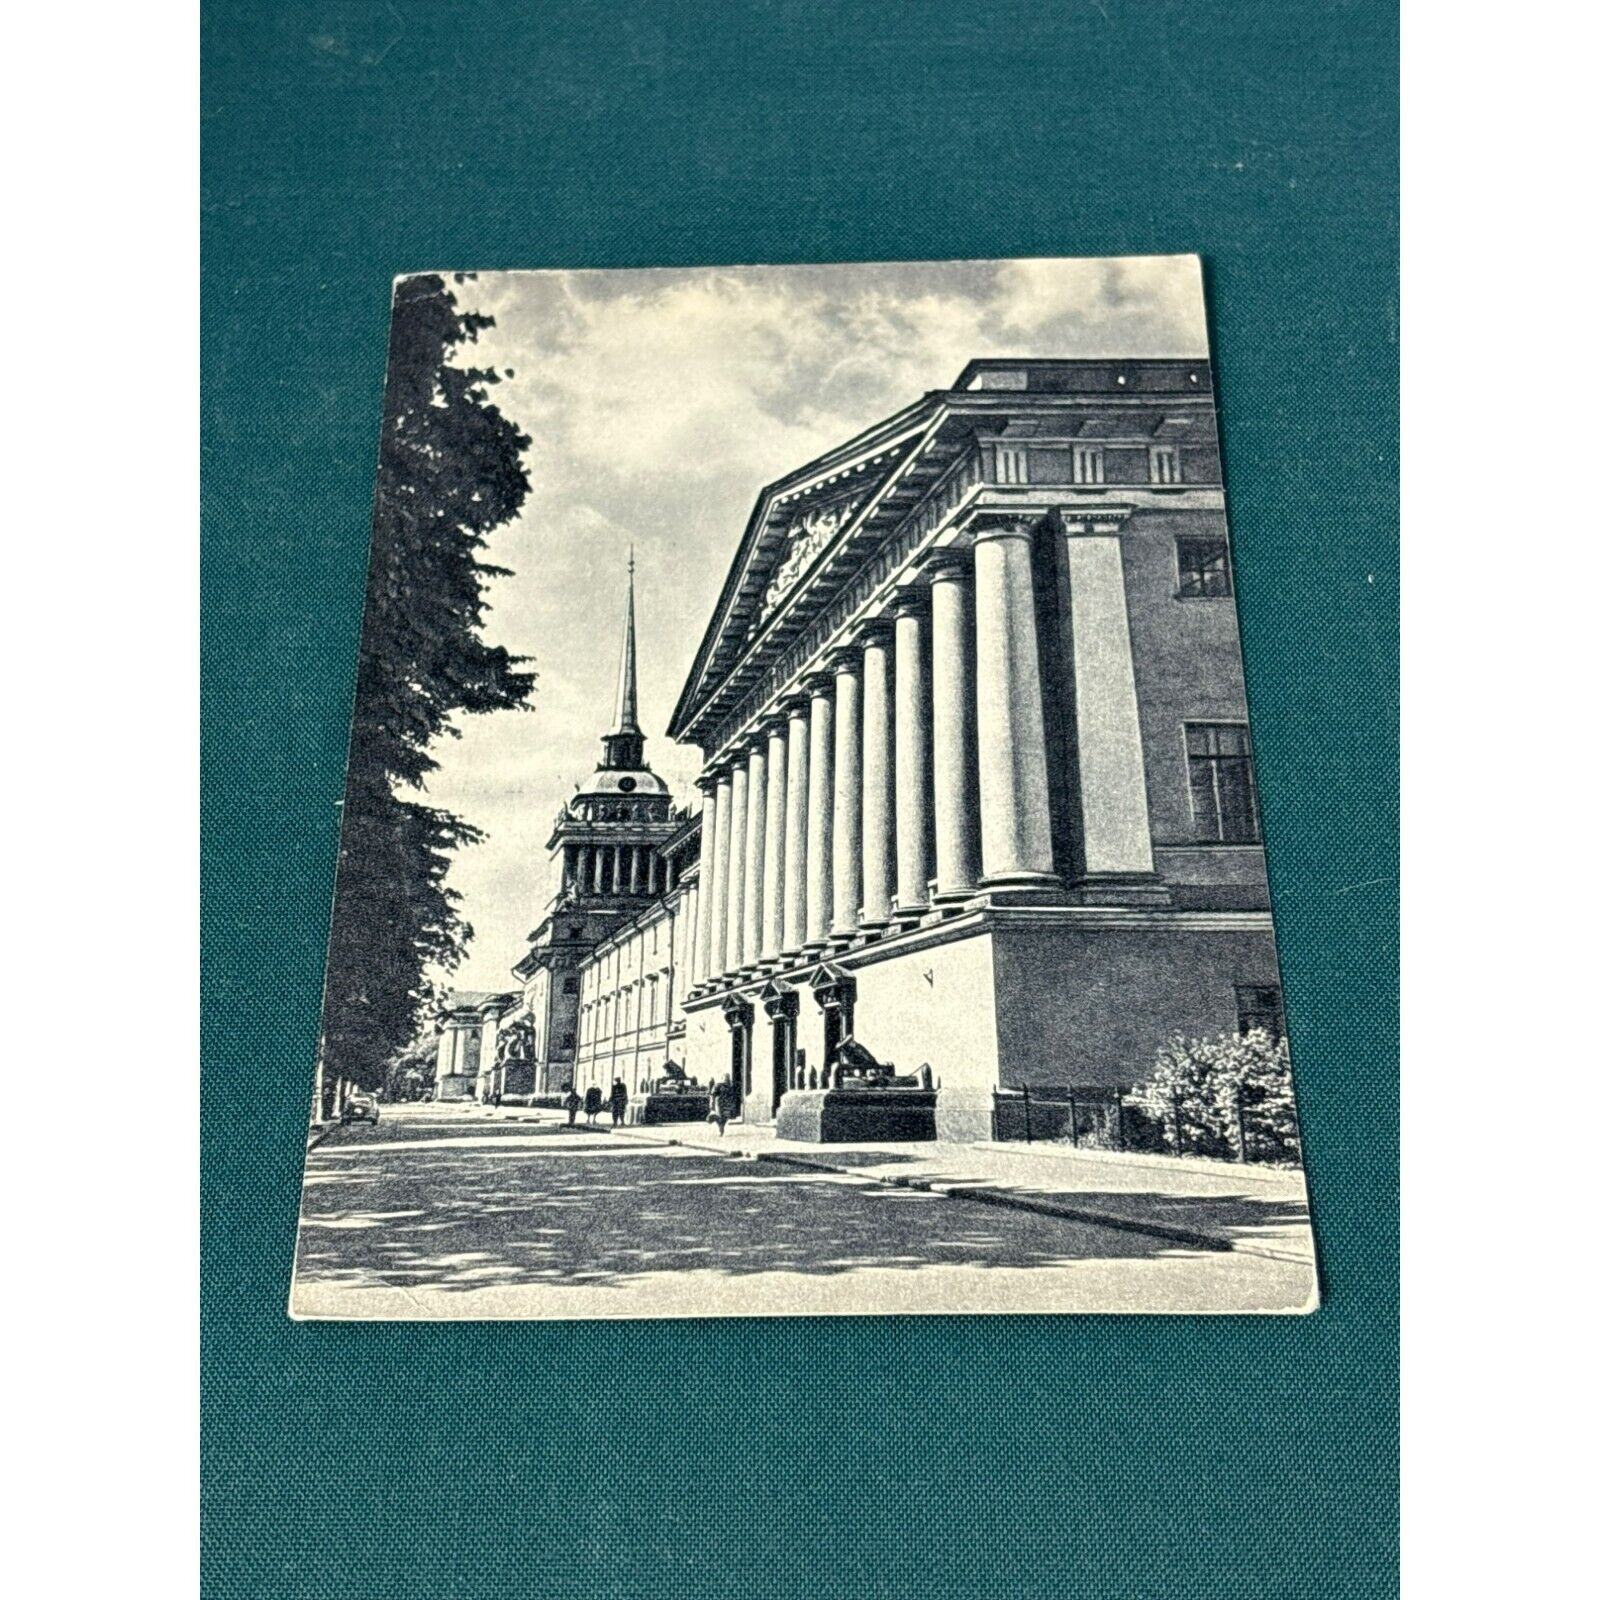 Admiralty Building Postcard Leningrad St Petersburg Russia Black and White